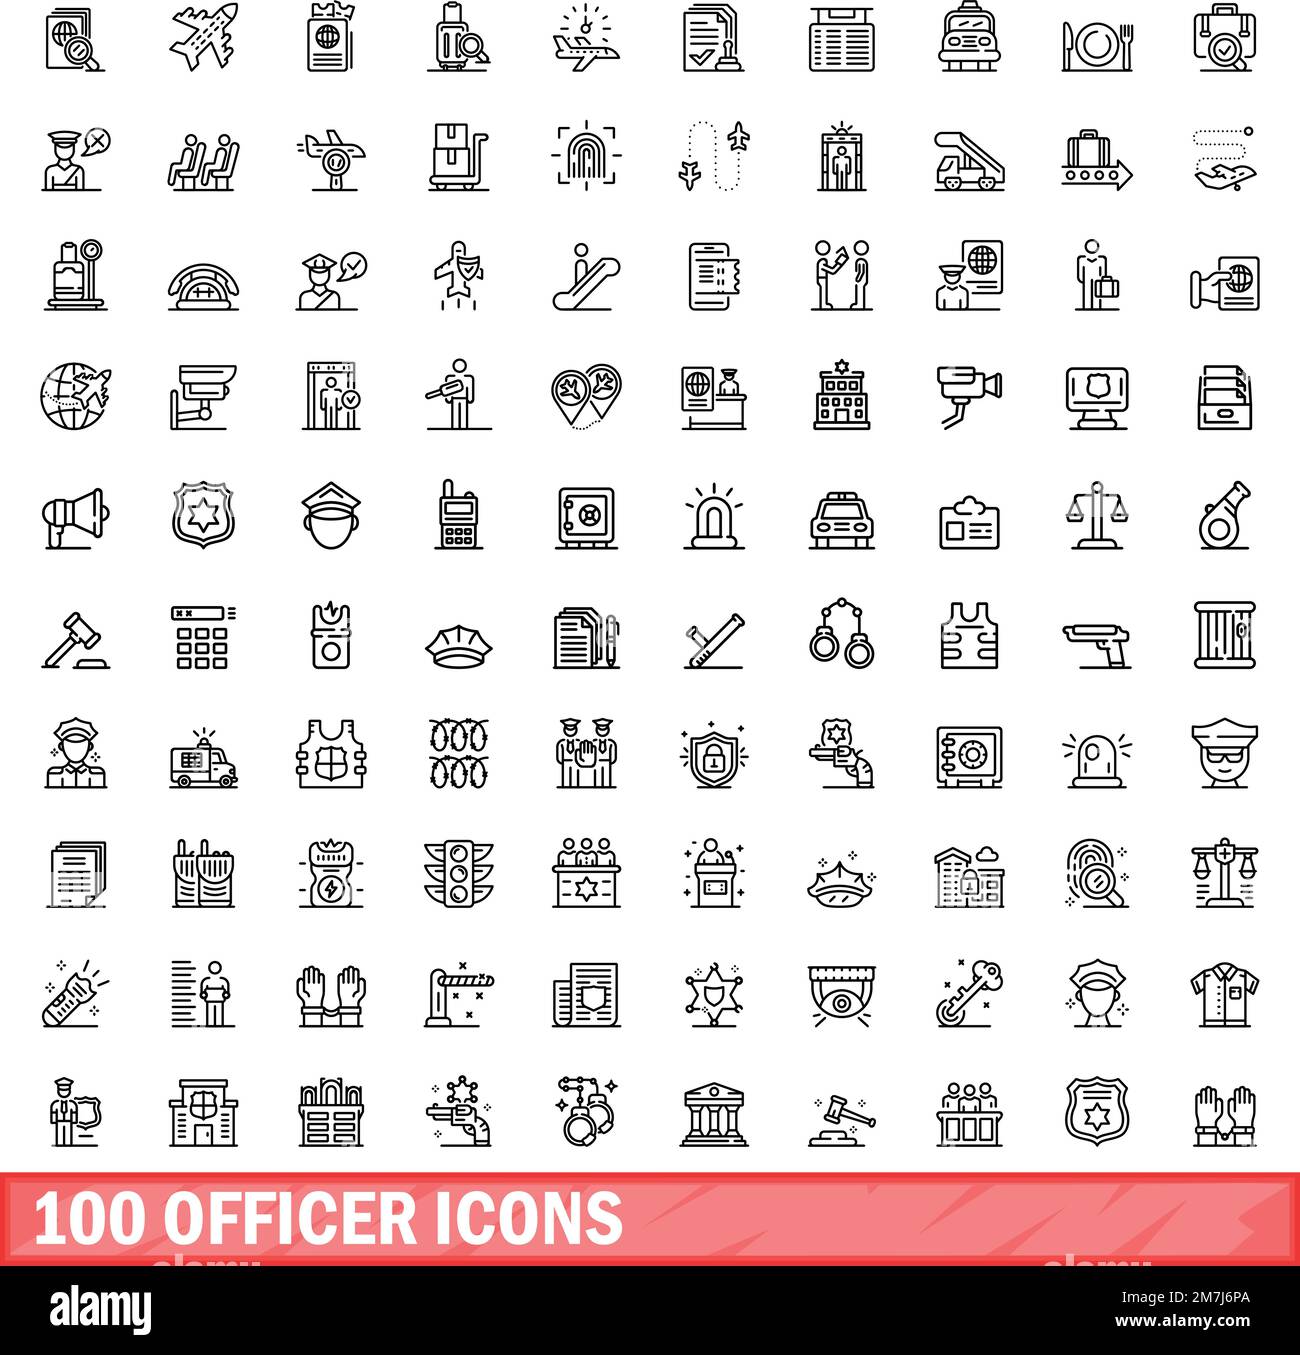 100 officer icons set. Outline illustration of 100 officer icons vector set isolated on white background Stock Vector